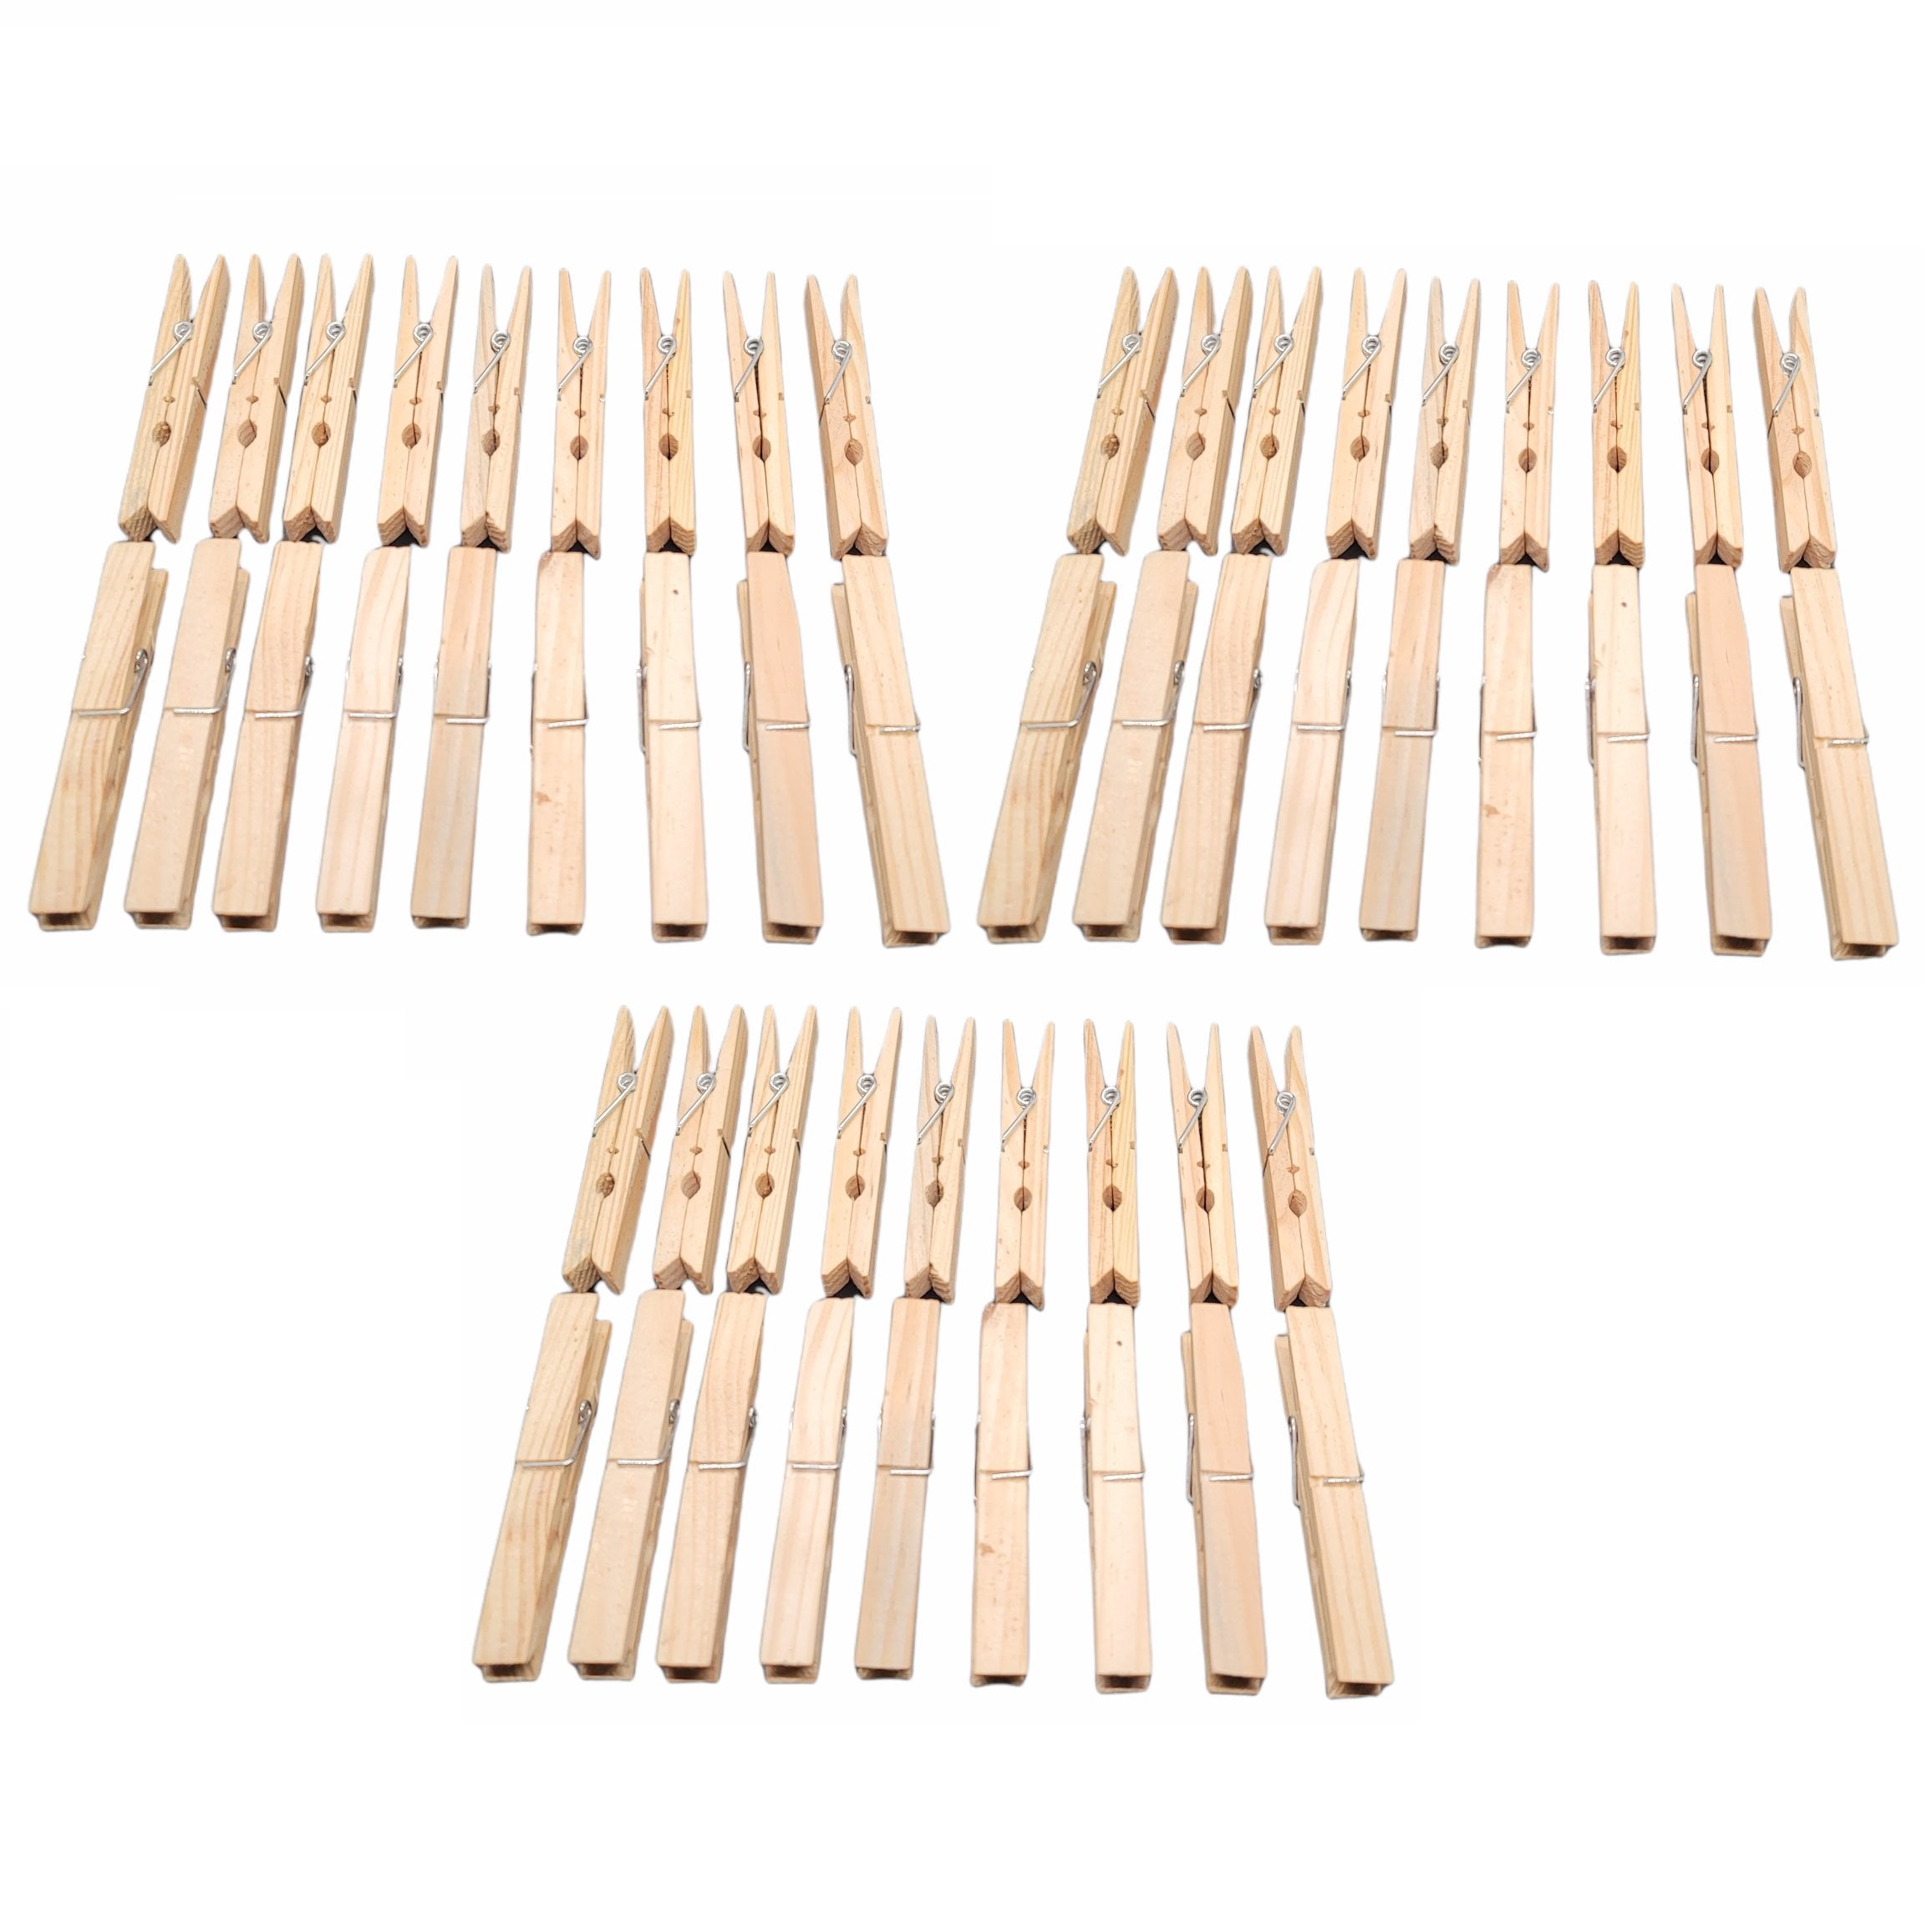 Wooden Clothespins & Laundry Clips, Lifetime Guarantee